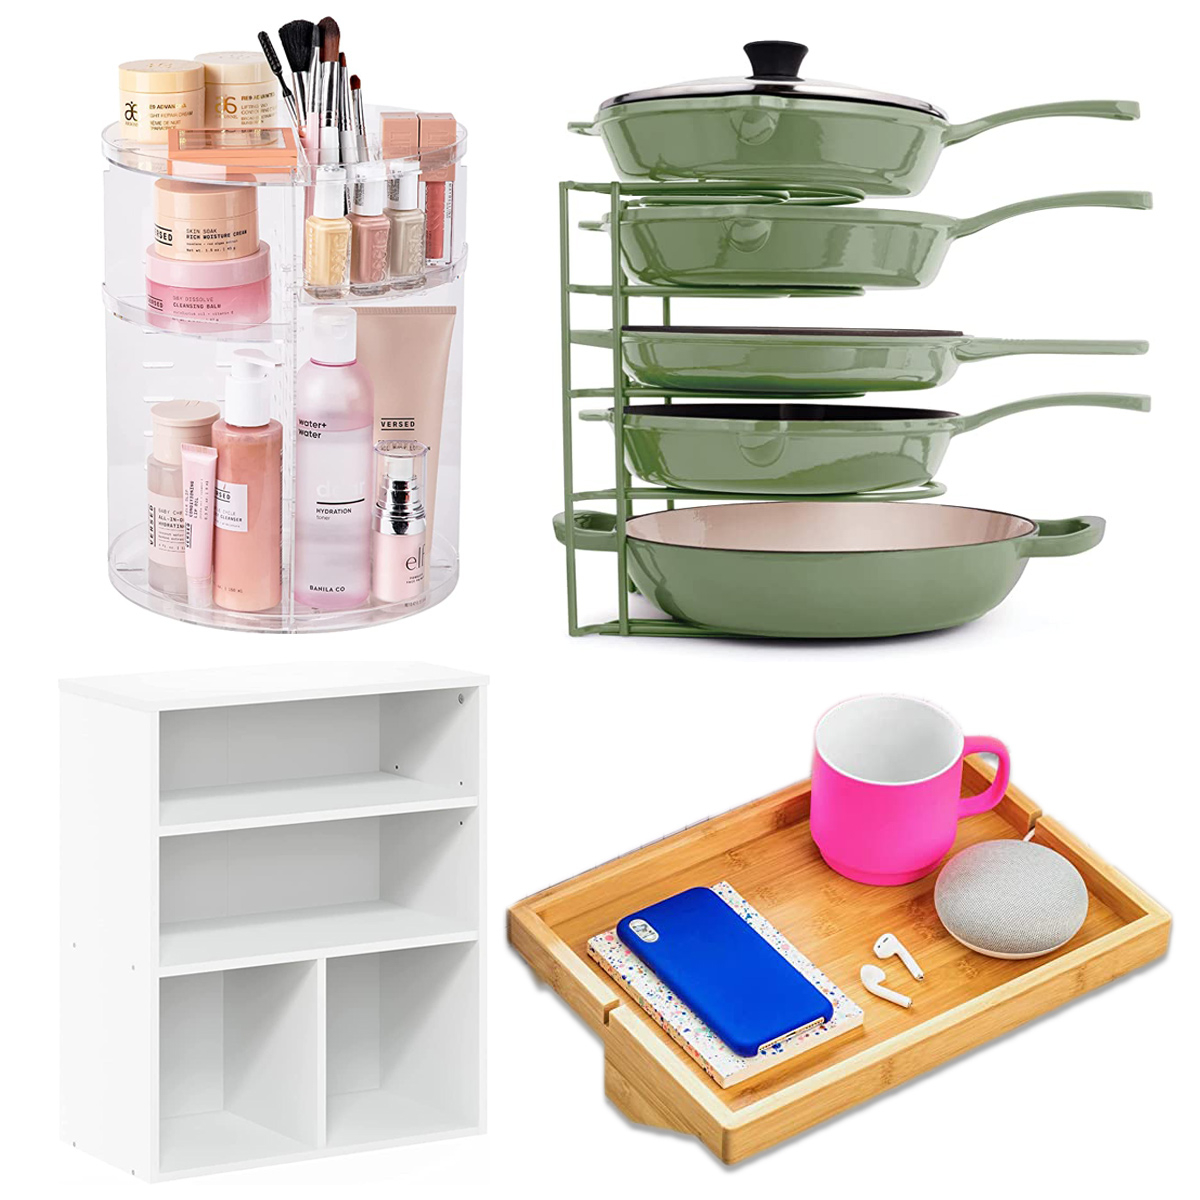 Has So Many Deals on Popular Home Organization Products